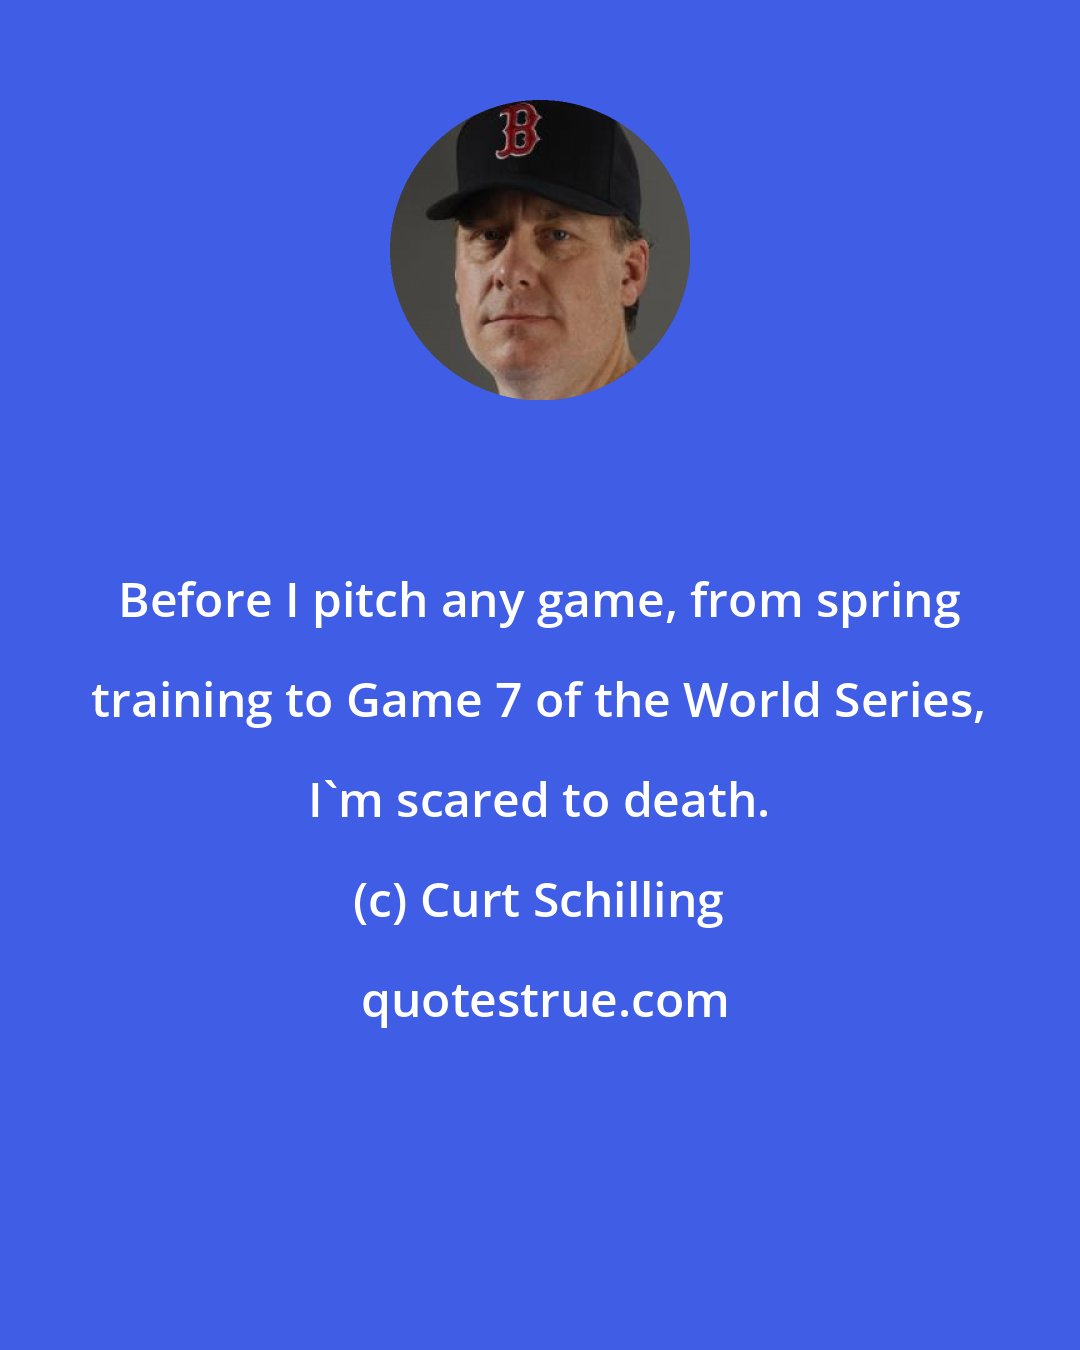 Curt Schilling: Before I pitch any game, from spring training to Game 7 of the World Series, I'm scared to death.